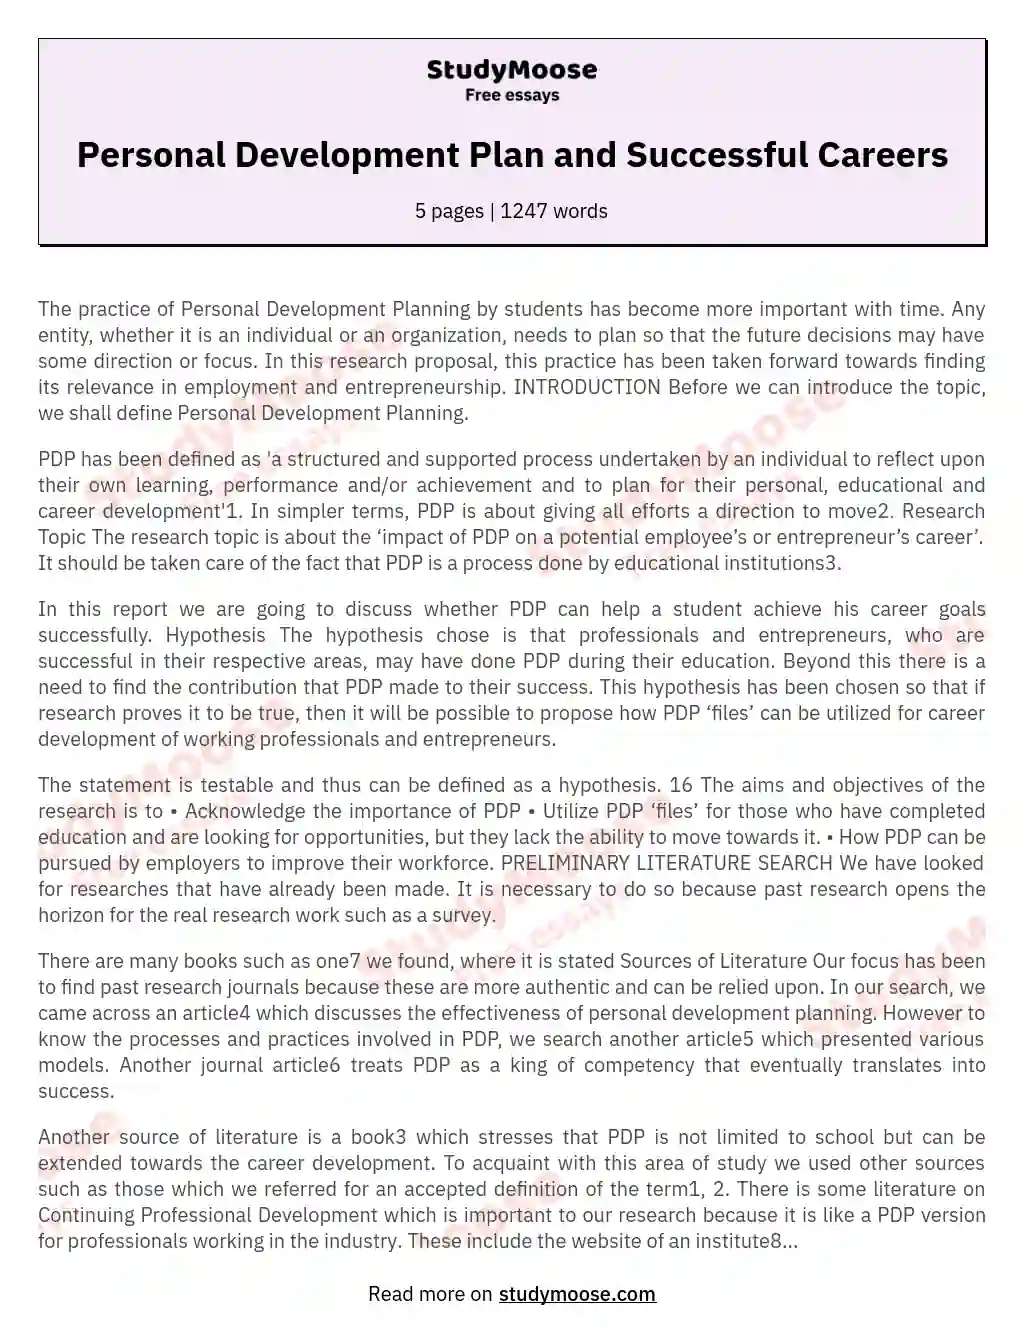 Personal Development Plan and Successful Careers essay